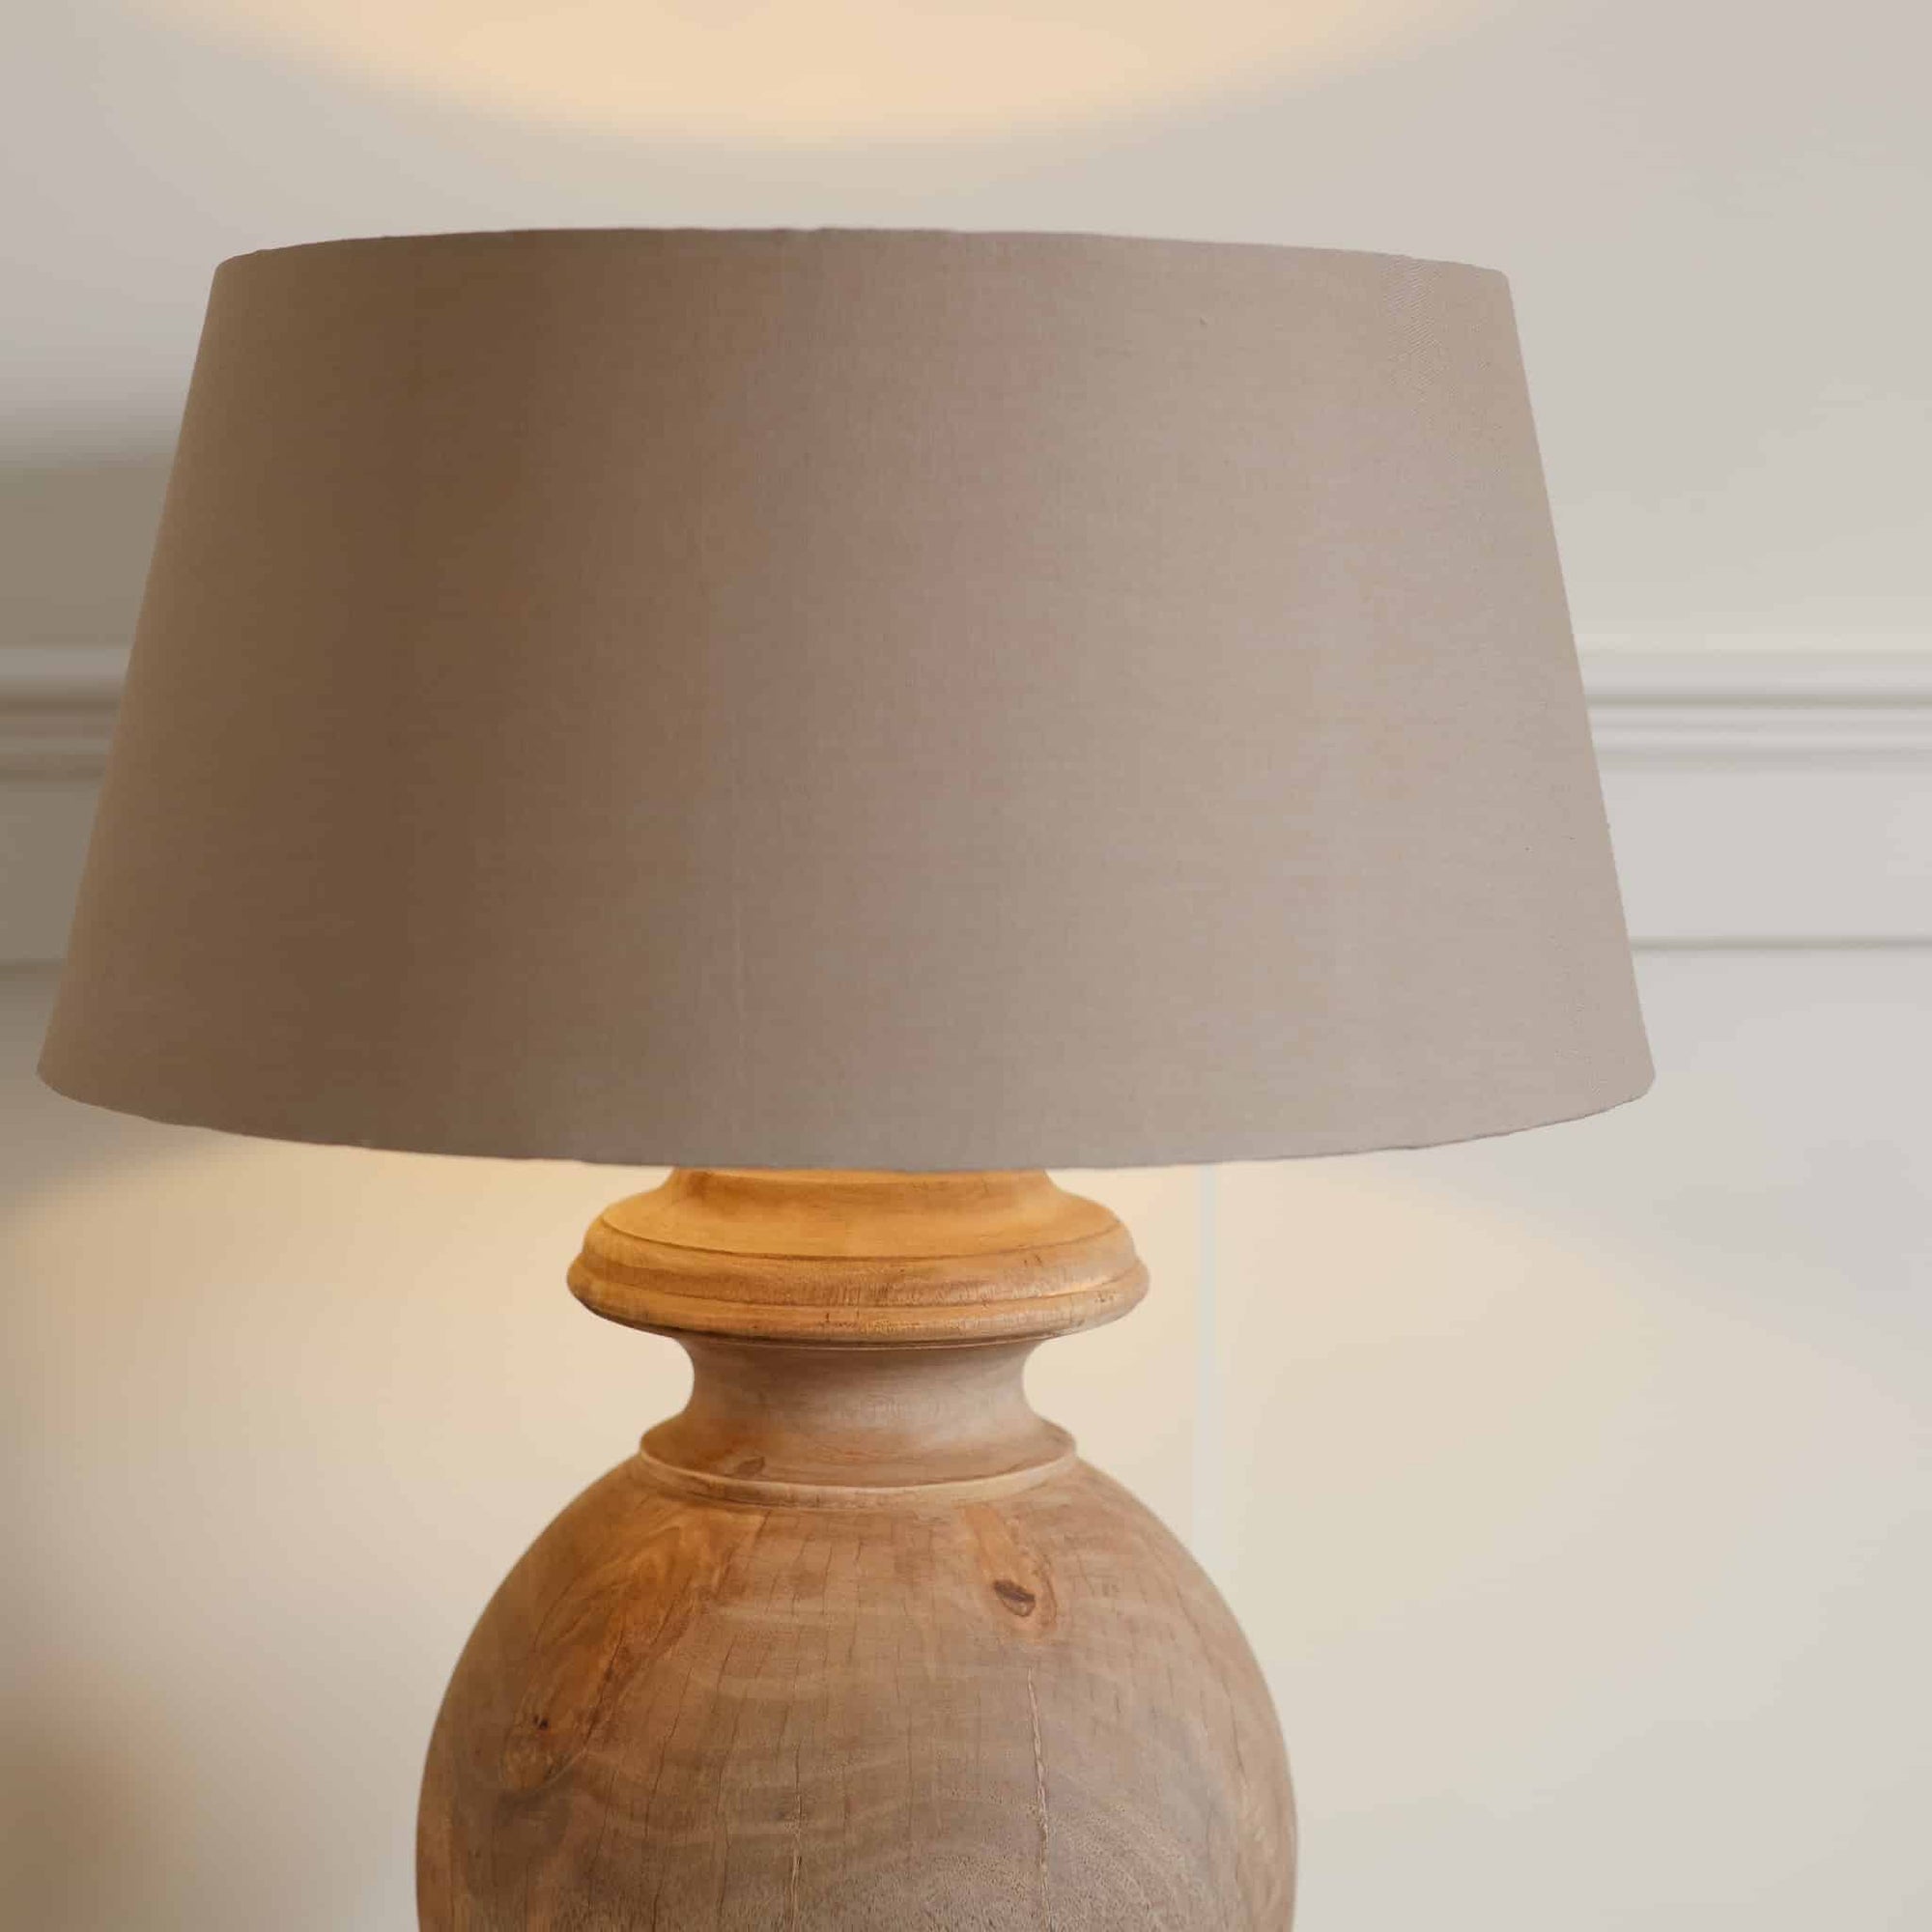 Beige linen lamp shade on round wood lamp, switched on in front of white background.